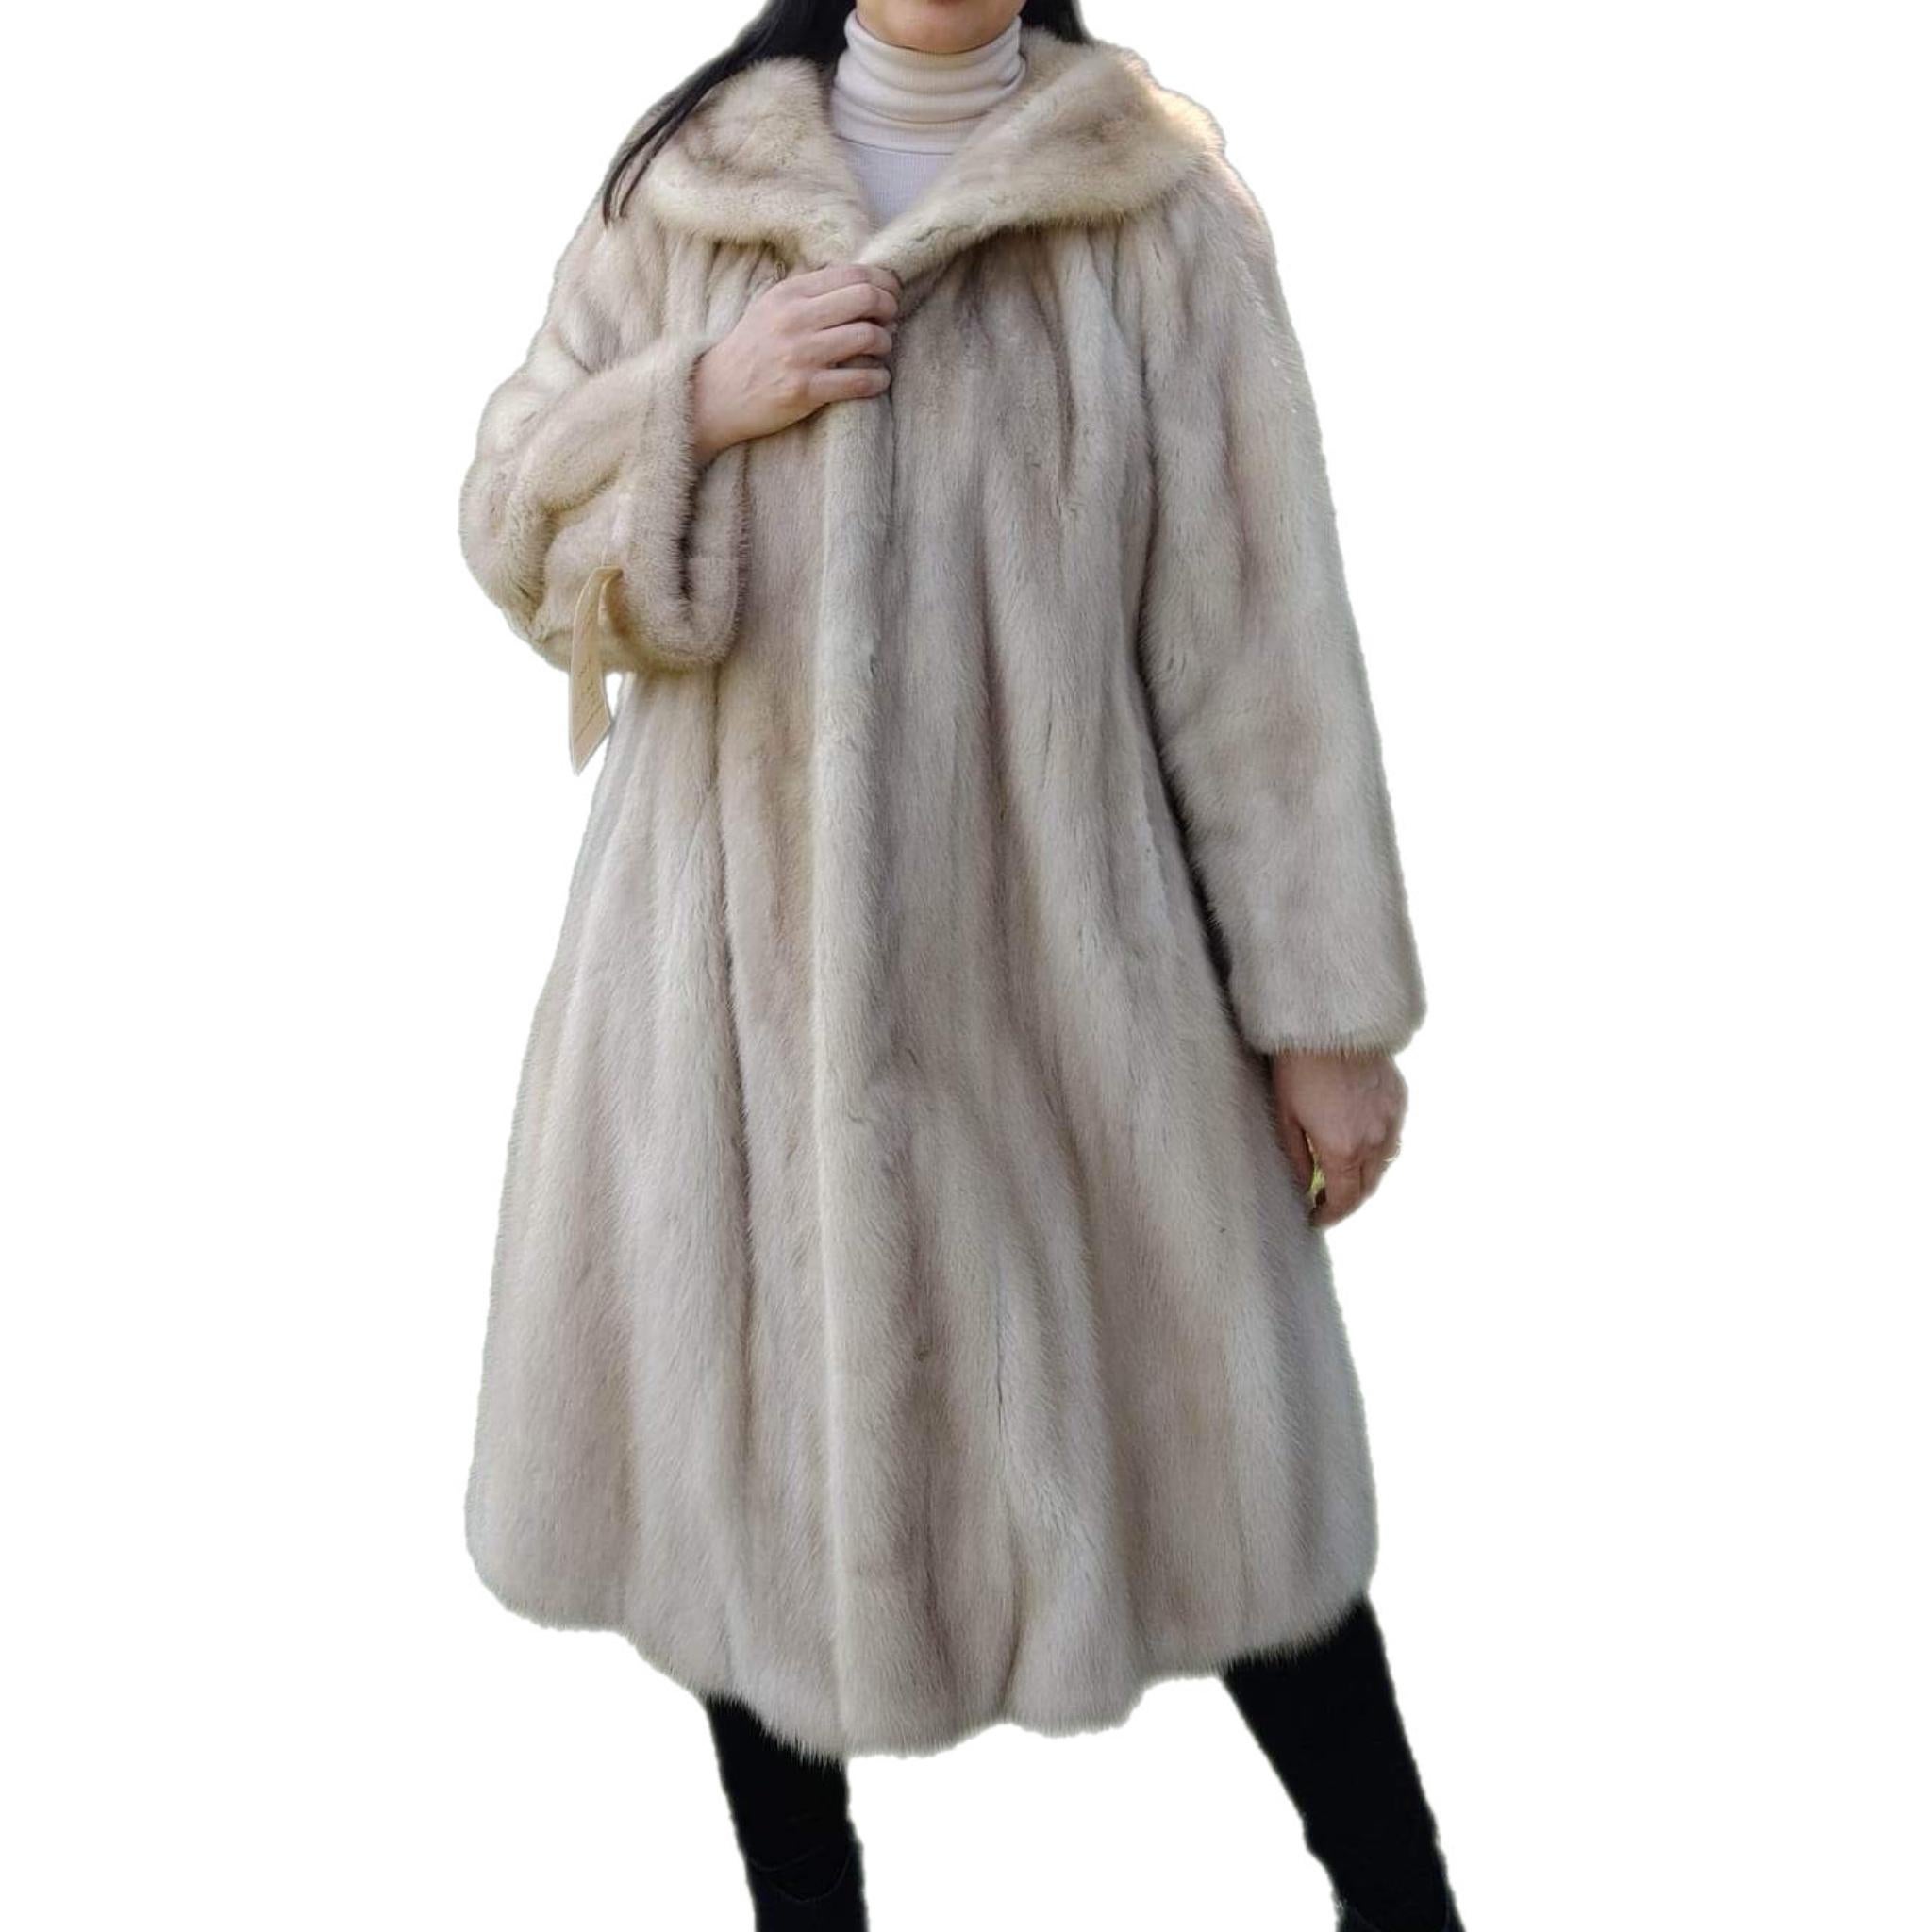 ~ Unused Blush Pastel Mink Fur Coat (Size 12 - l) 

When it comes to fur, Canada Majestic is the ultimate reference in quality and style. This stunning blush coat is a classic with the stroller design and short collar stitching workmanship. It has a